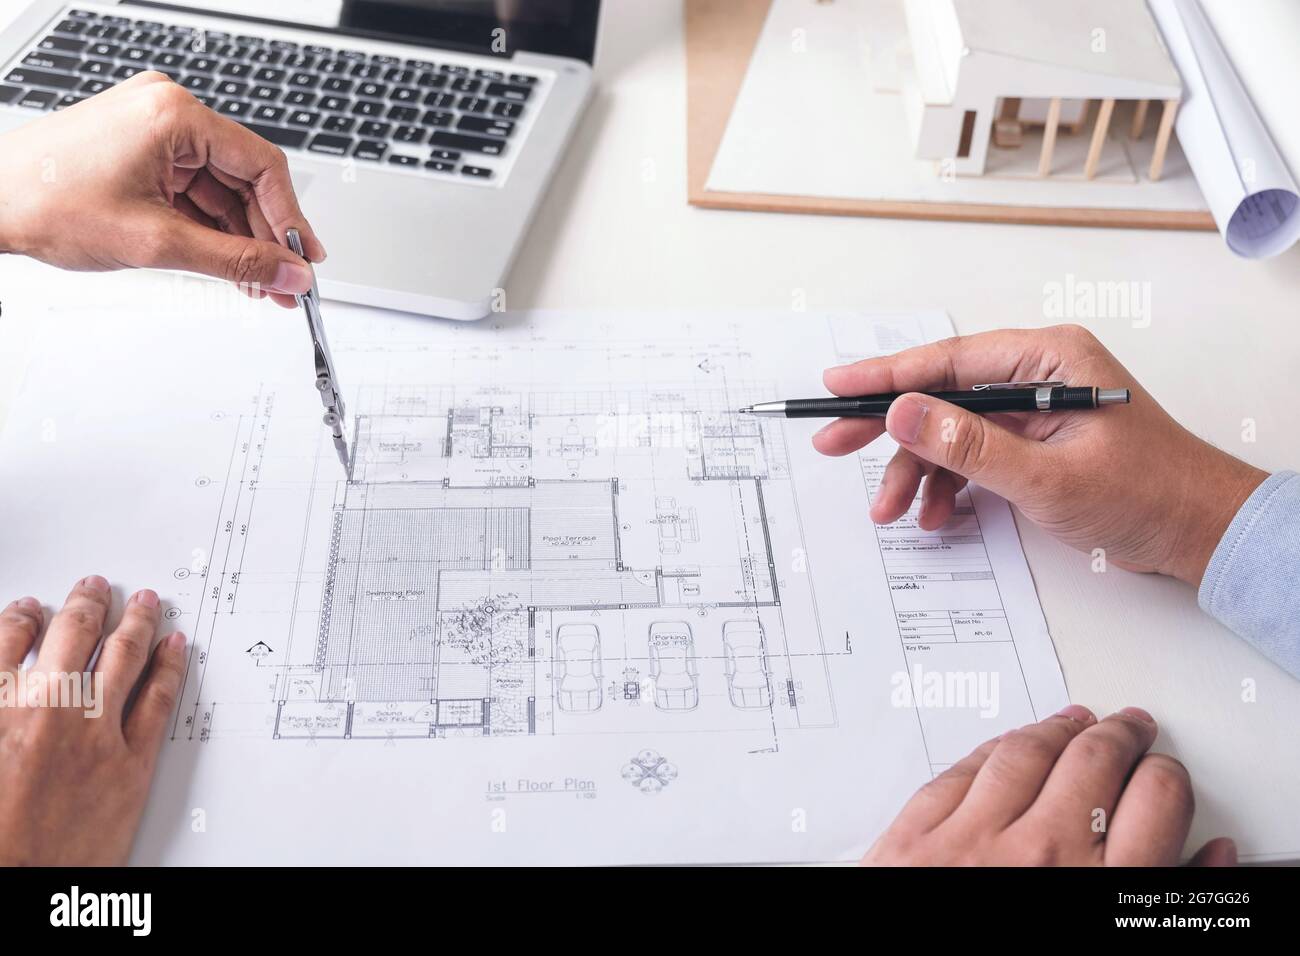 Engineering or Creative architect in construction project, Engineers hands working with compasses on construction blueprint building at a workplace in Stock Photo